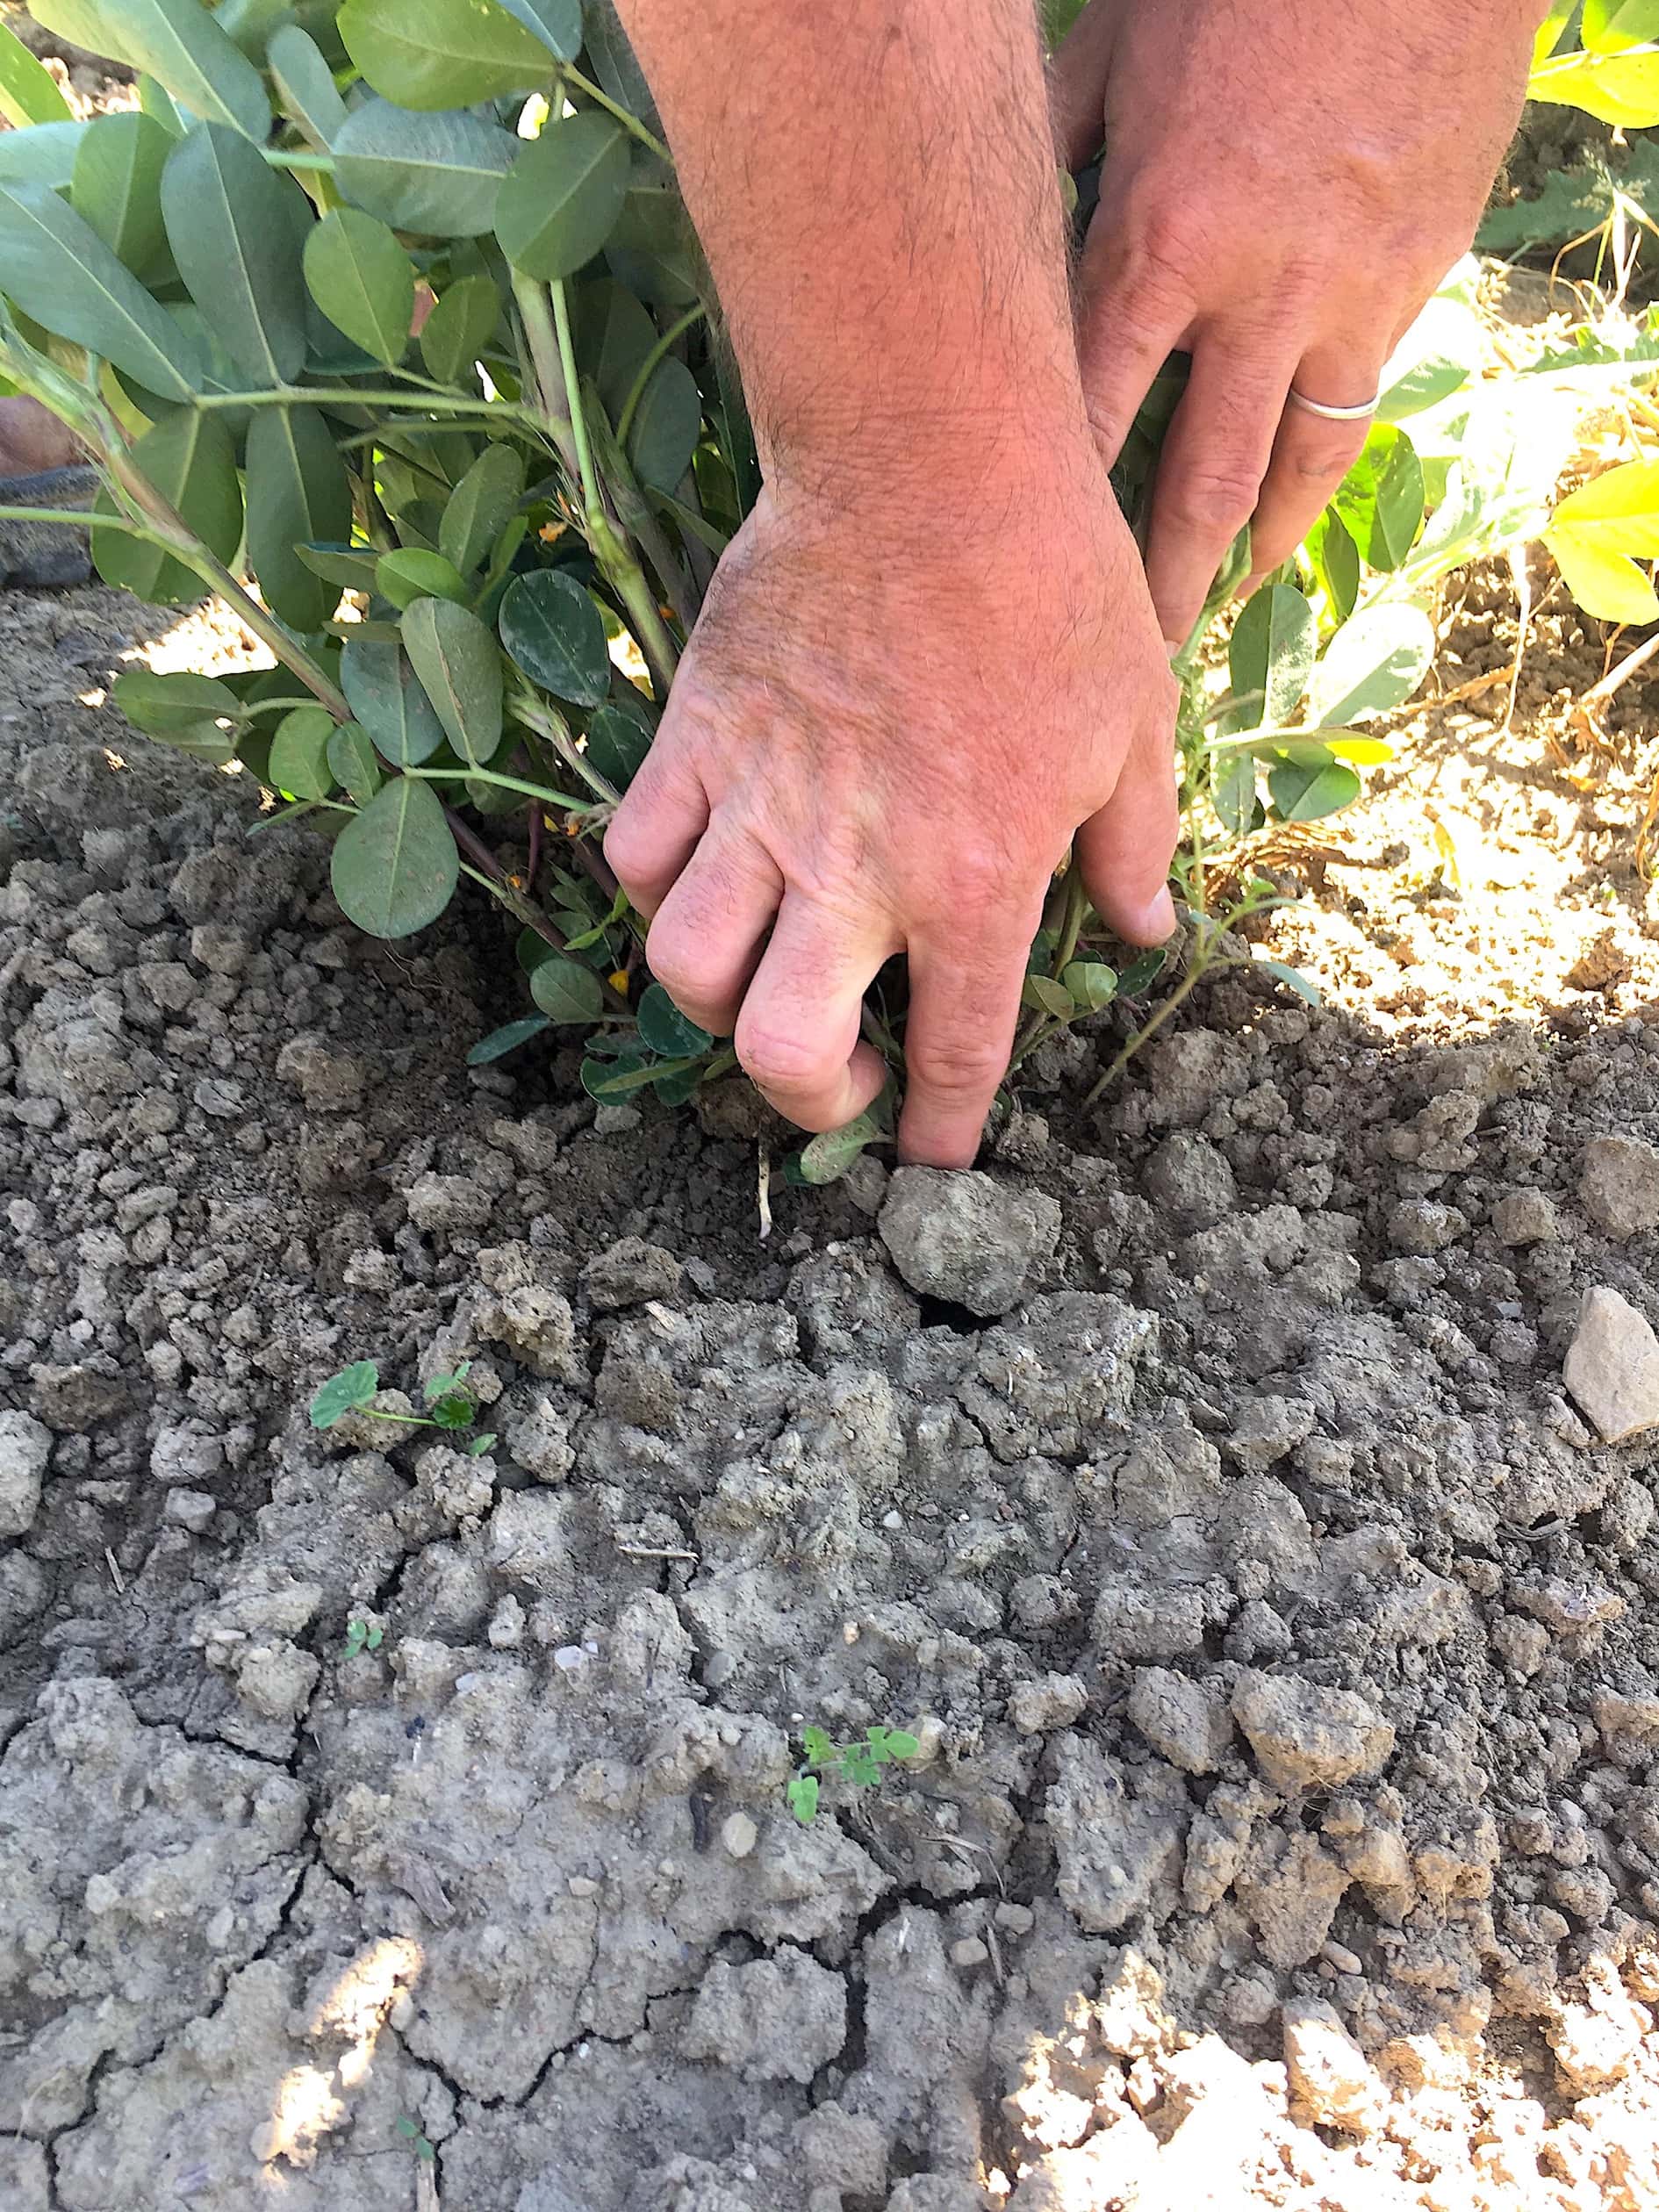 See the white shoot near Eric's finger? That is the "peg," which eventually produces peanuts underground.